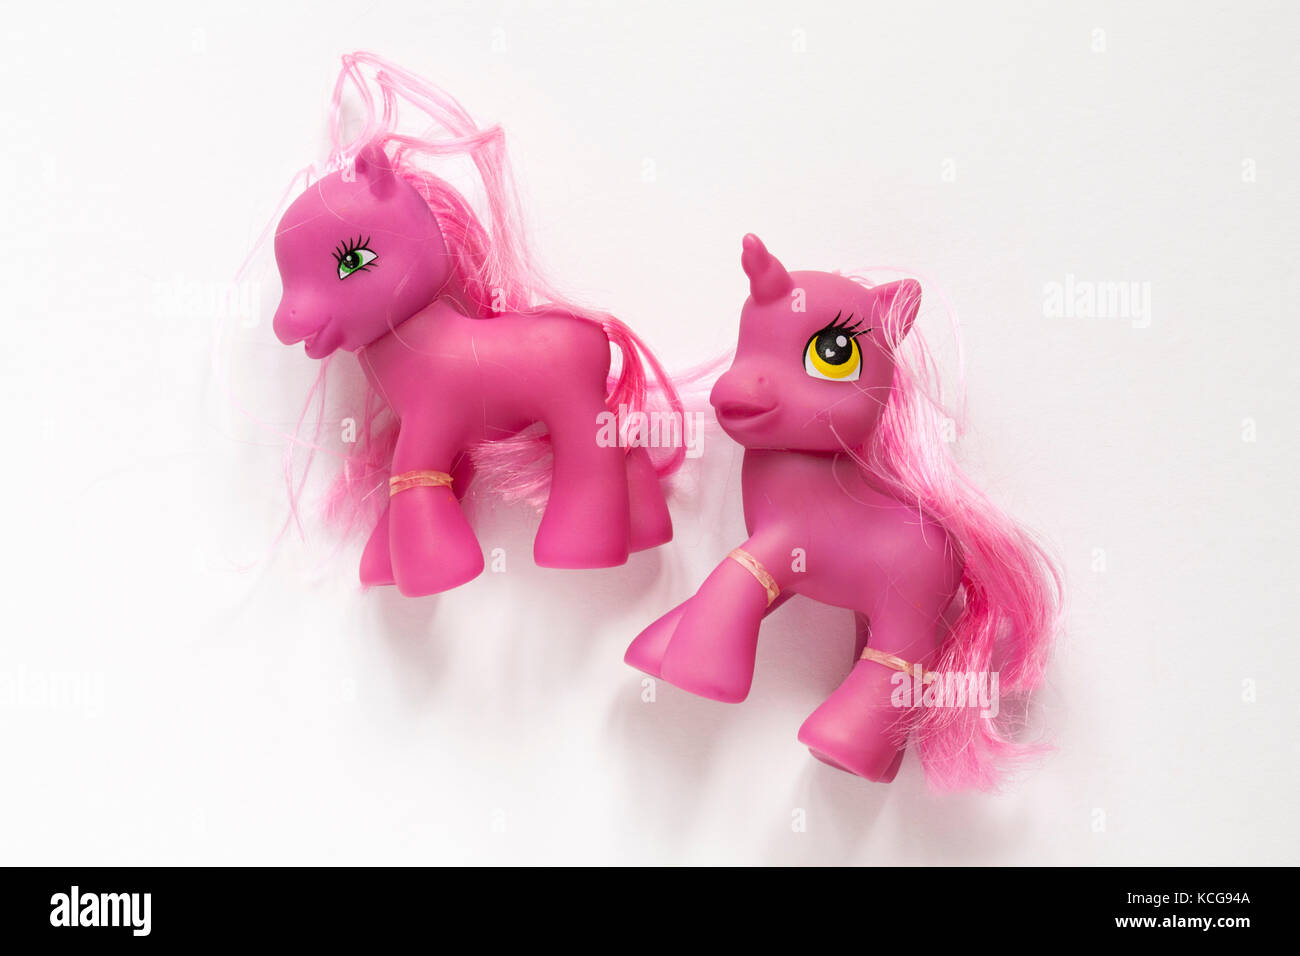 Two pink My little pony toys isolated on white background Stock Photo -  Alamy